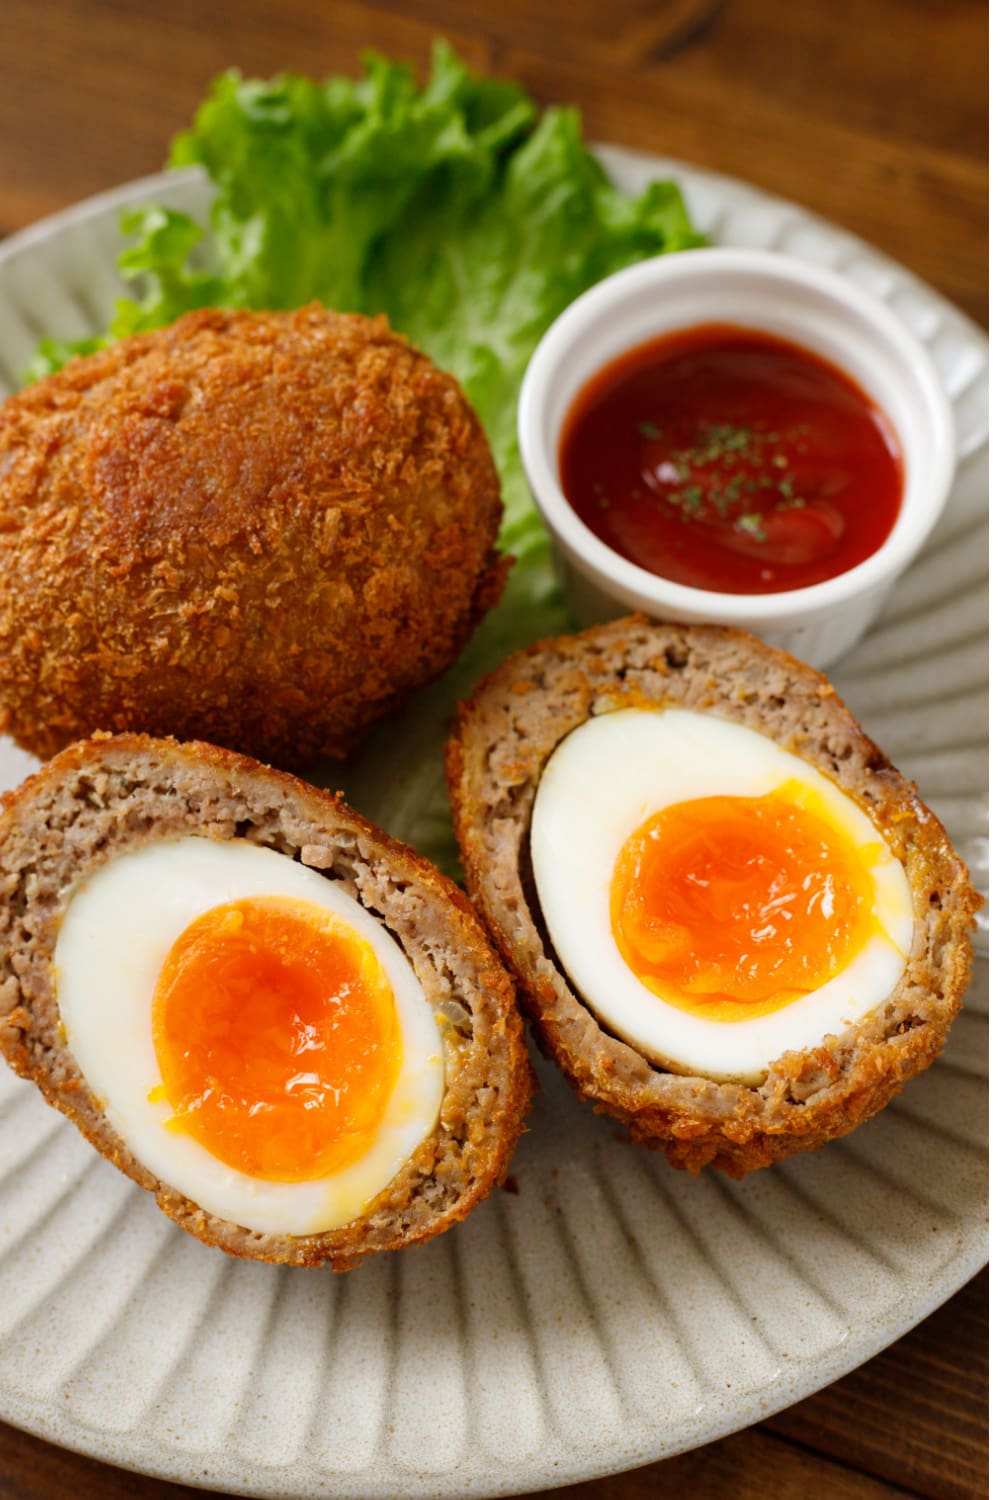 Breaded whole and sliced in half boiled eggs served with dip.